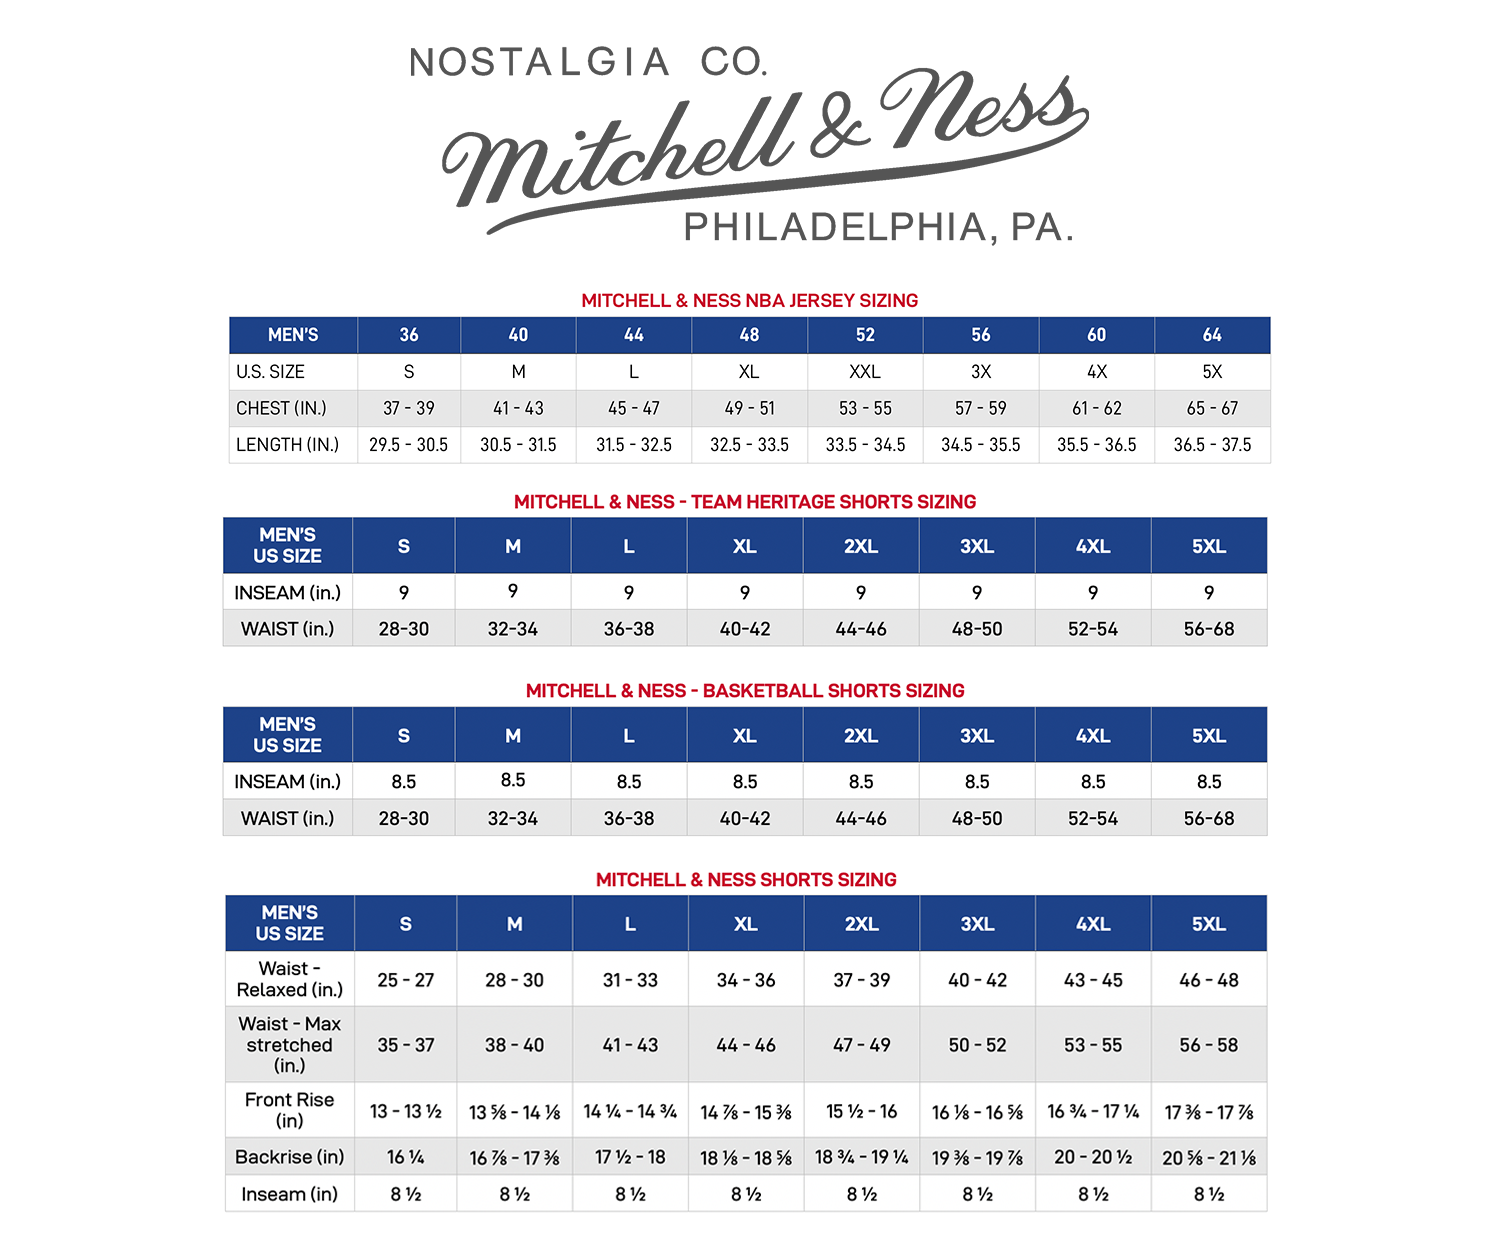 Size Chart – NBA Store Philippines